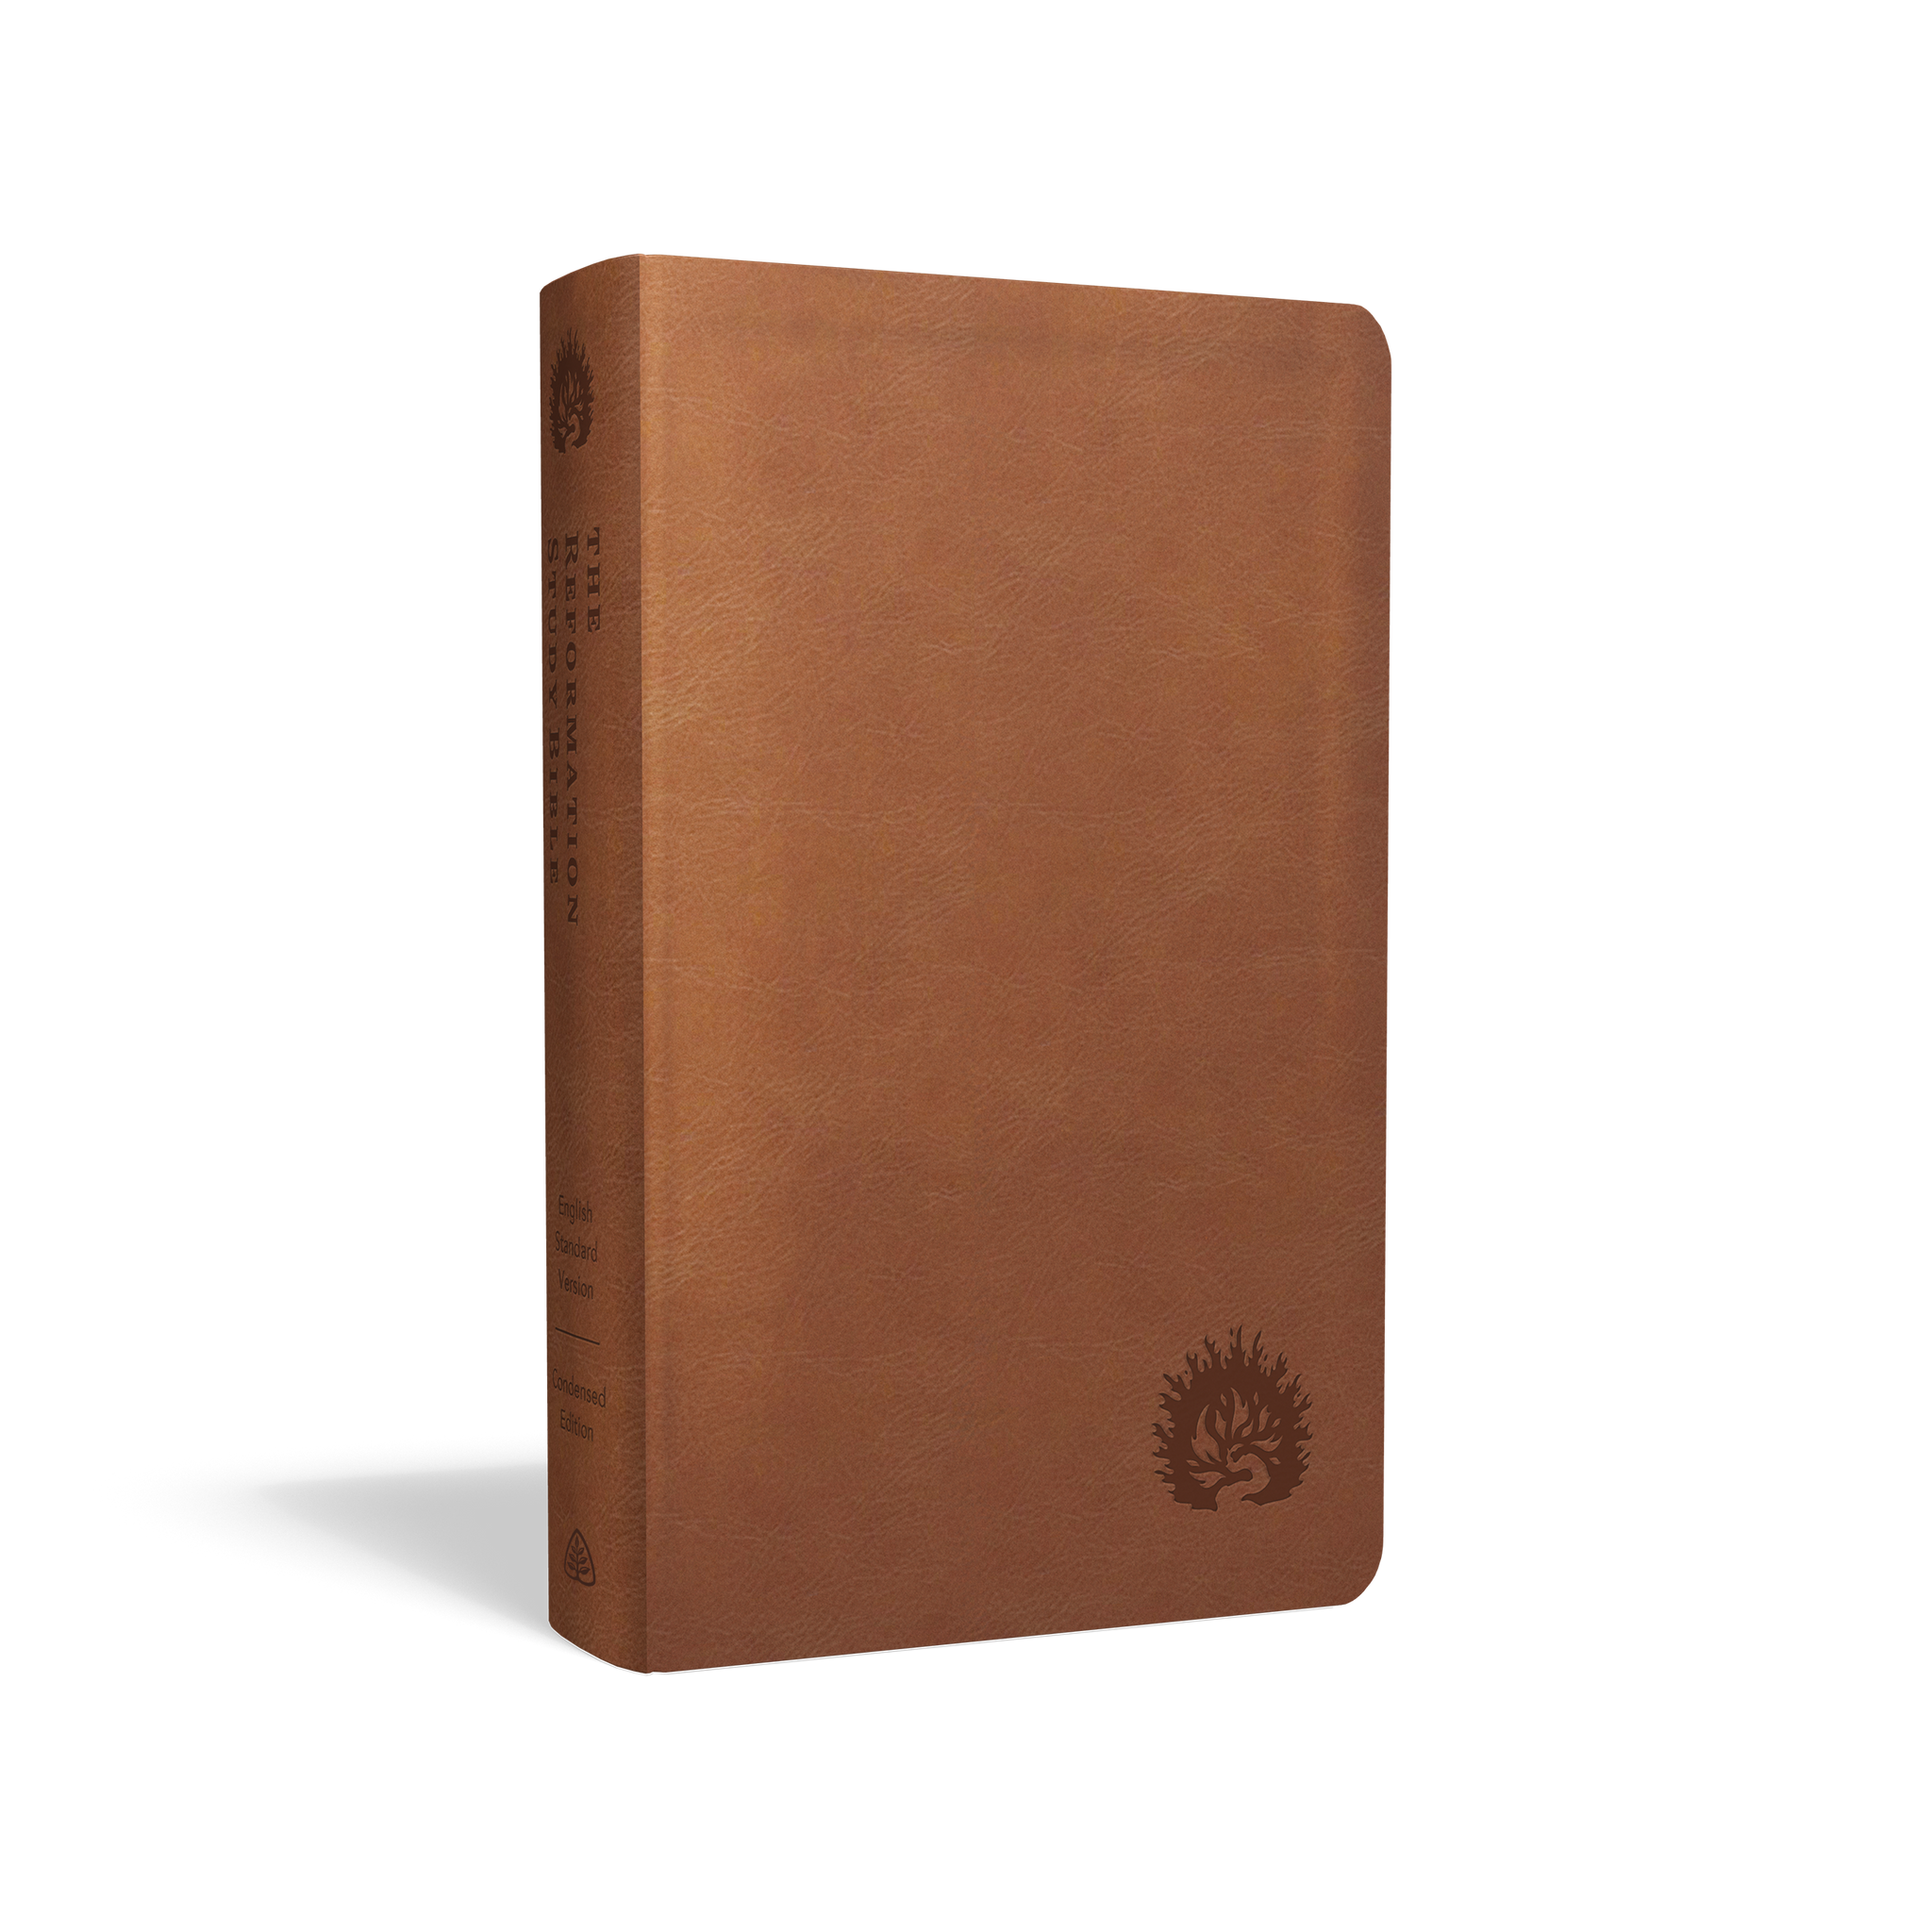 ESV Reformation Study Bible, Condensed Edition (Leather-like, Light Brown)